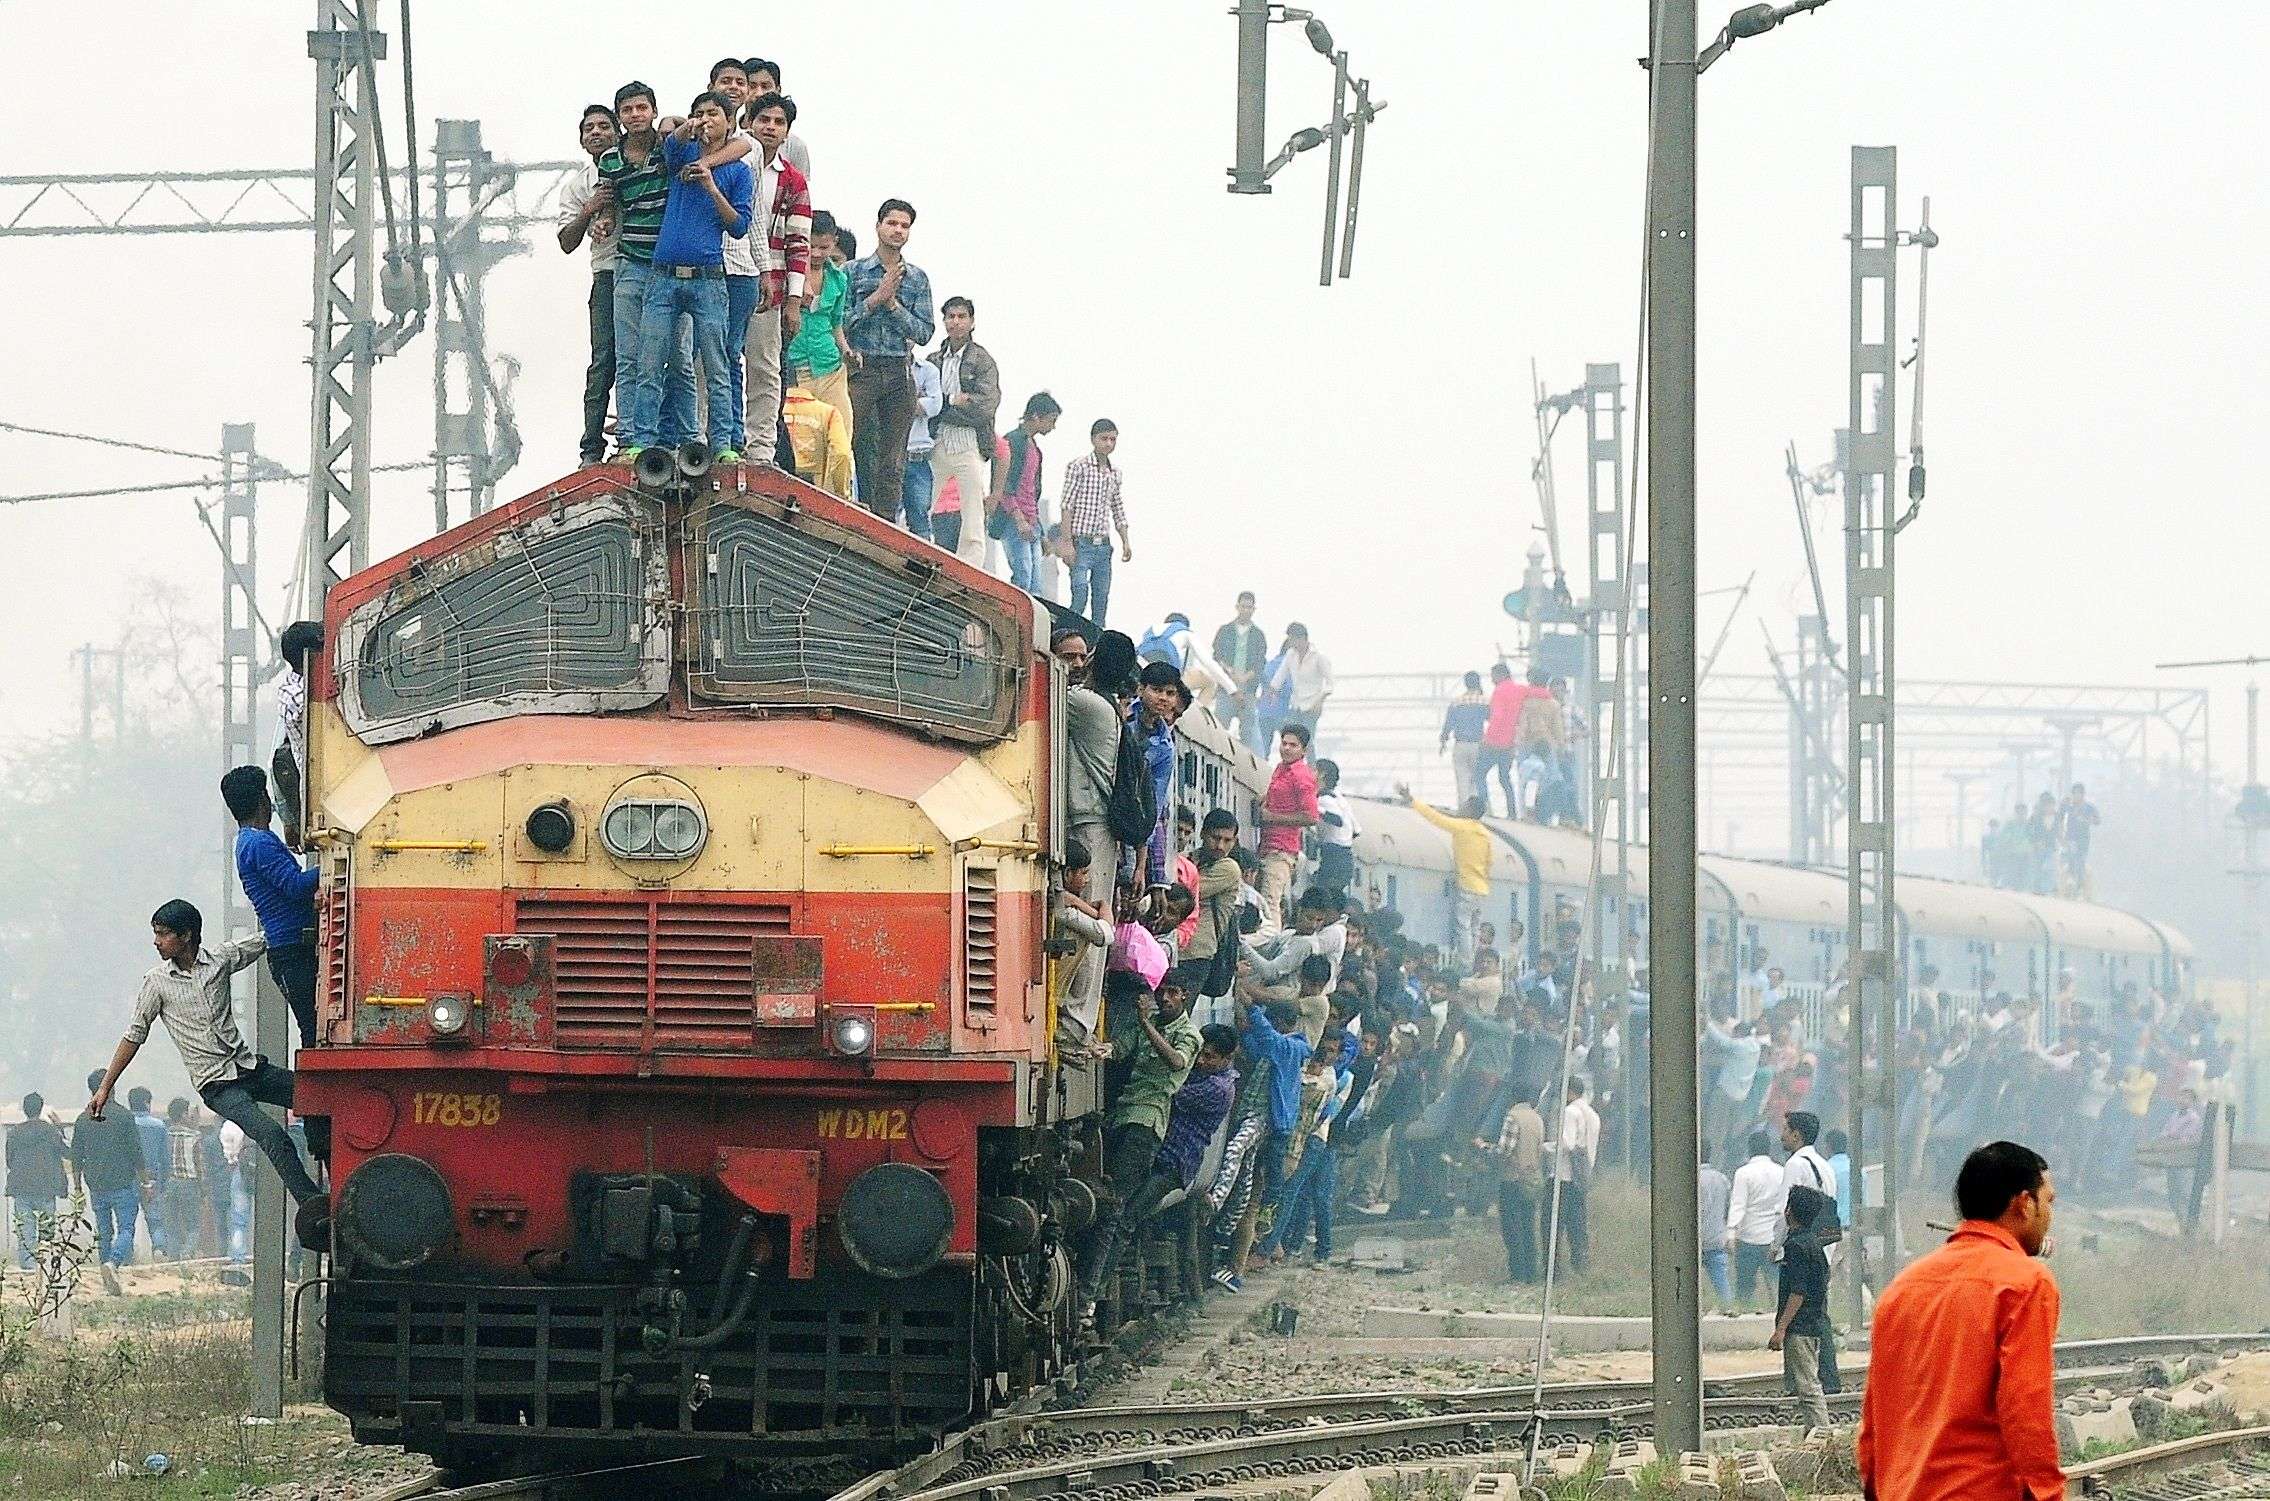 Indian passengers stand and hang onto a train as it departs from a station on the outskirts of New Delhi on February 25, 2015.  Indian Railways Minister Suresh Prabhu is scheduled to present the railway budget to parliament on February 26.    AFP PHOTO/MONEY SHARMA